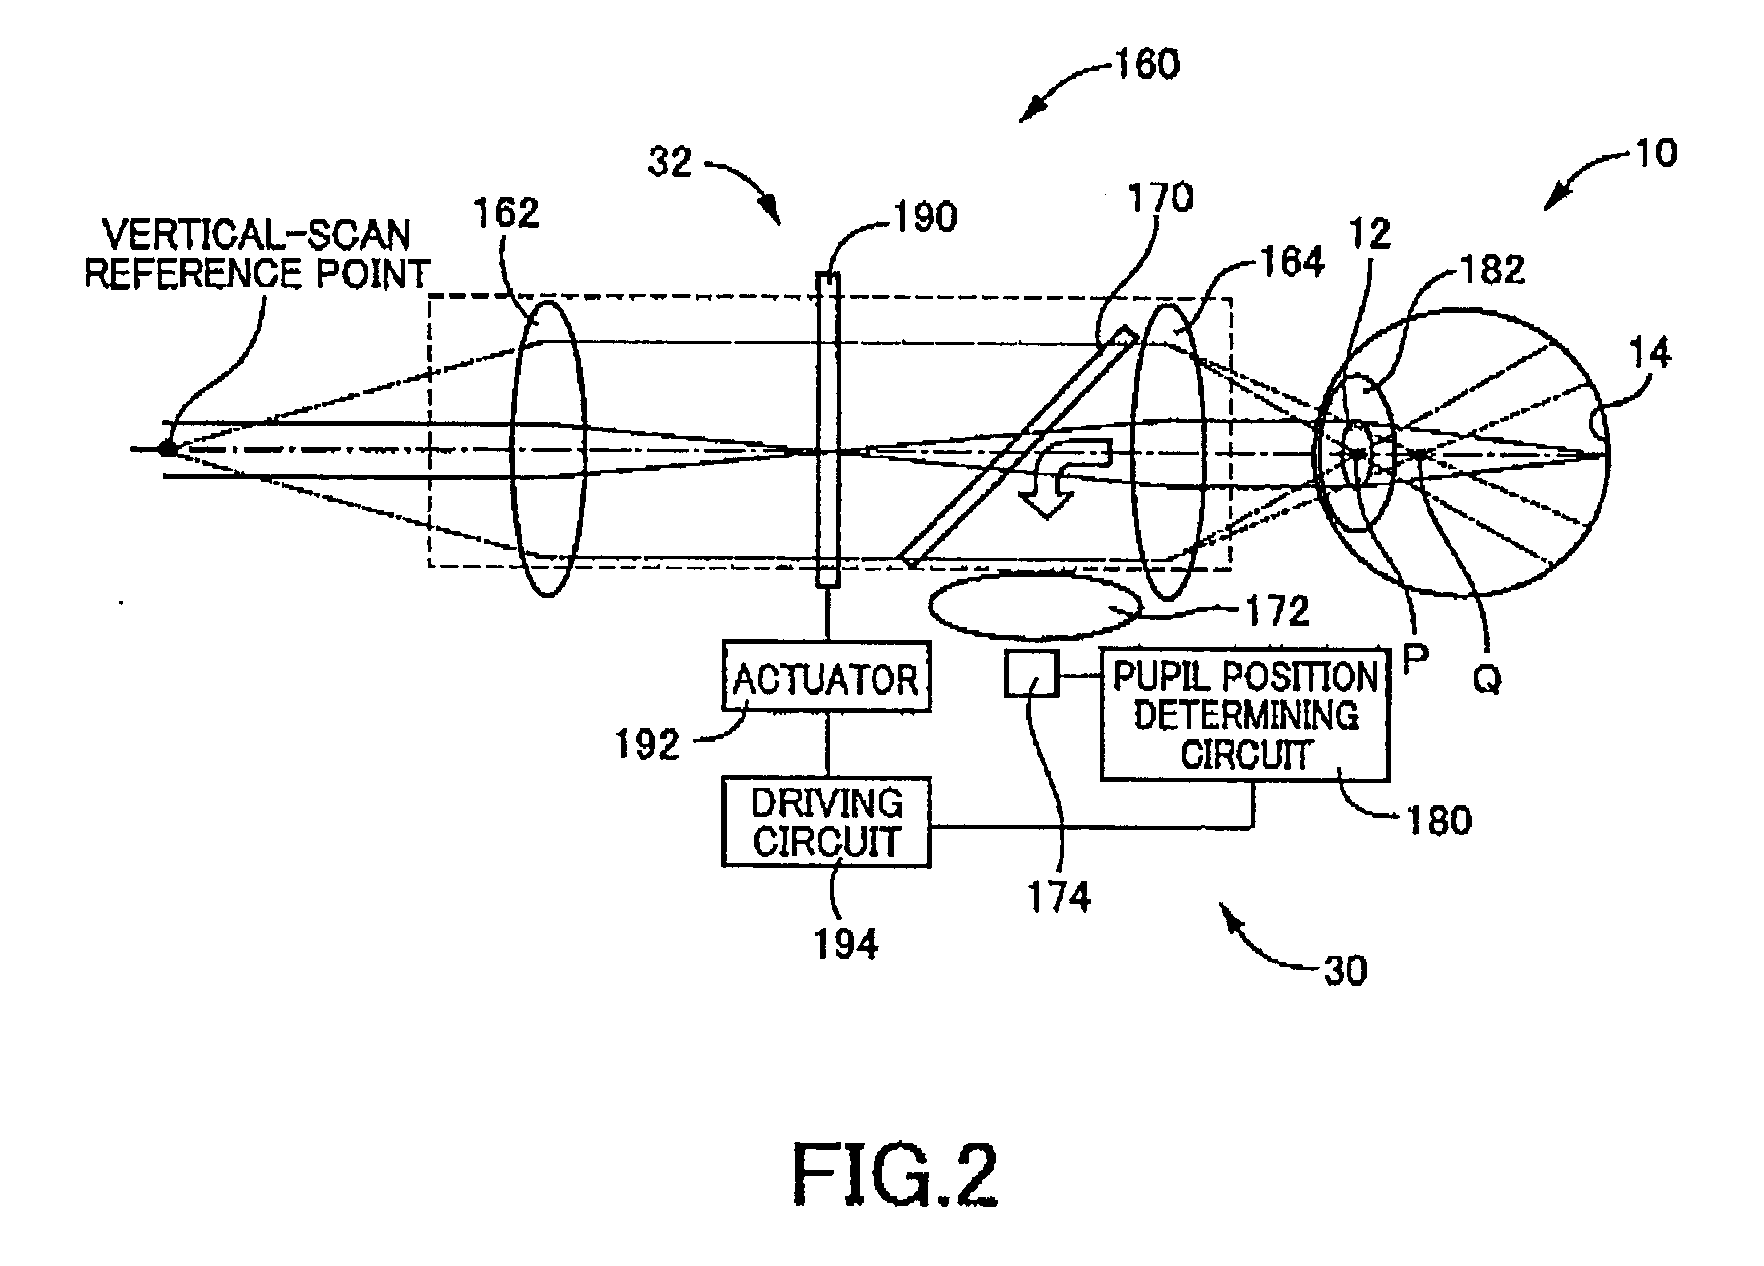 Device for tracking pupil of eyeball using intensity changes of reflected light from eyeball and image display using the same